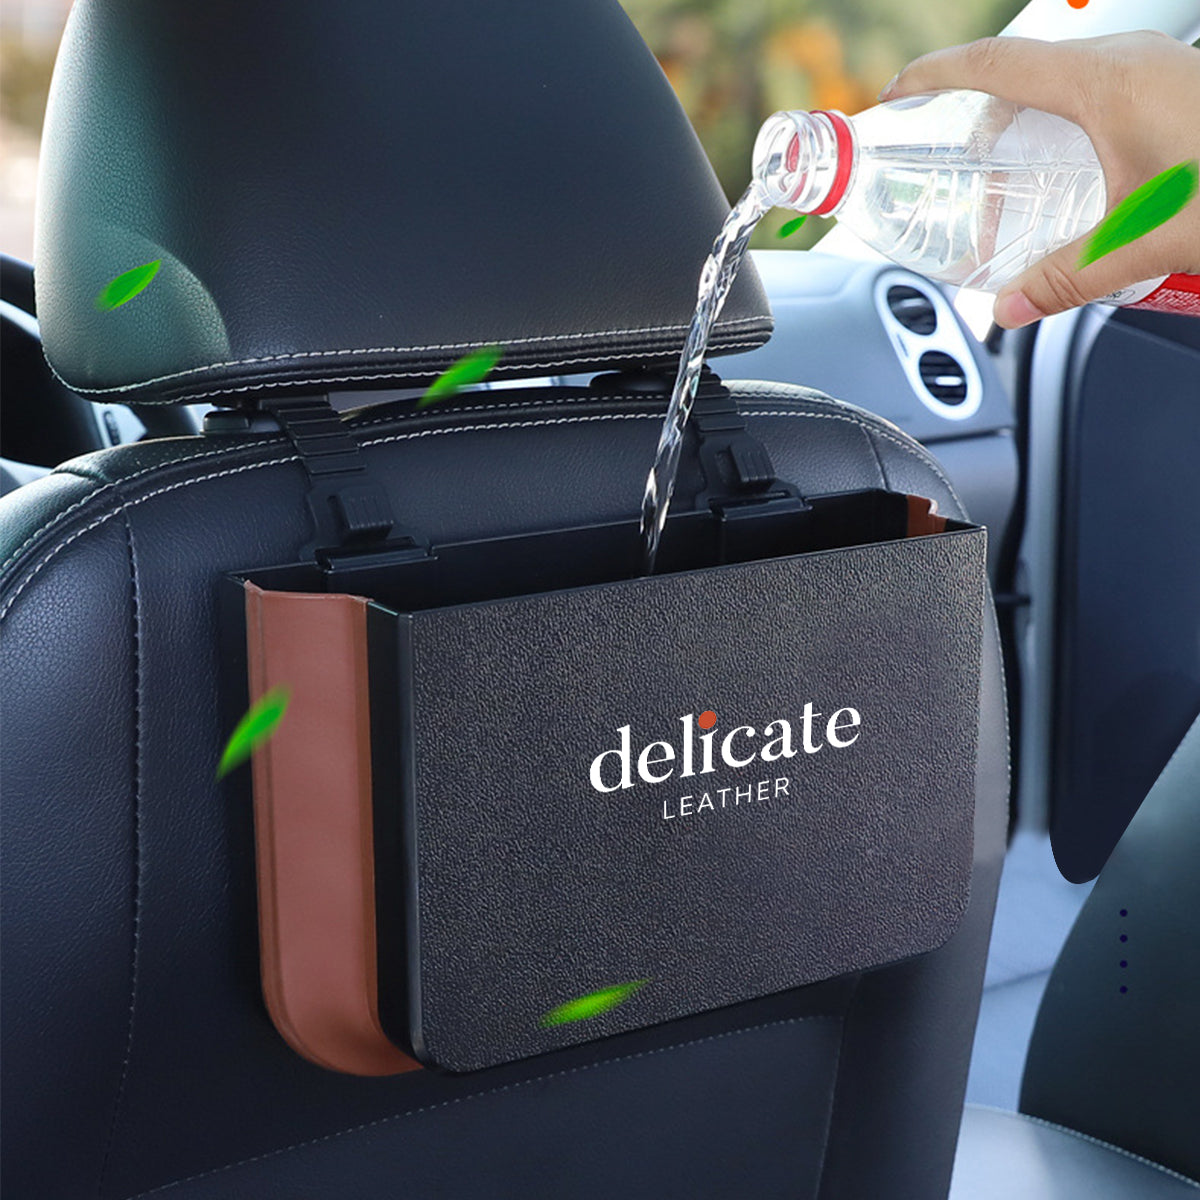 Delicate Leather Hanging Waterproof Car Trash can-Foldable, Custom For Your Cars, Waterproof, and Equipped with Cup Holders and Trays. Multi-Purpose, Car Accessories CA11992